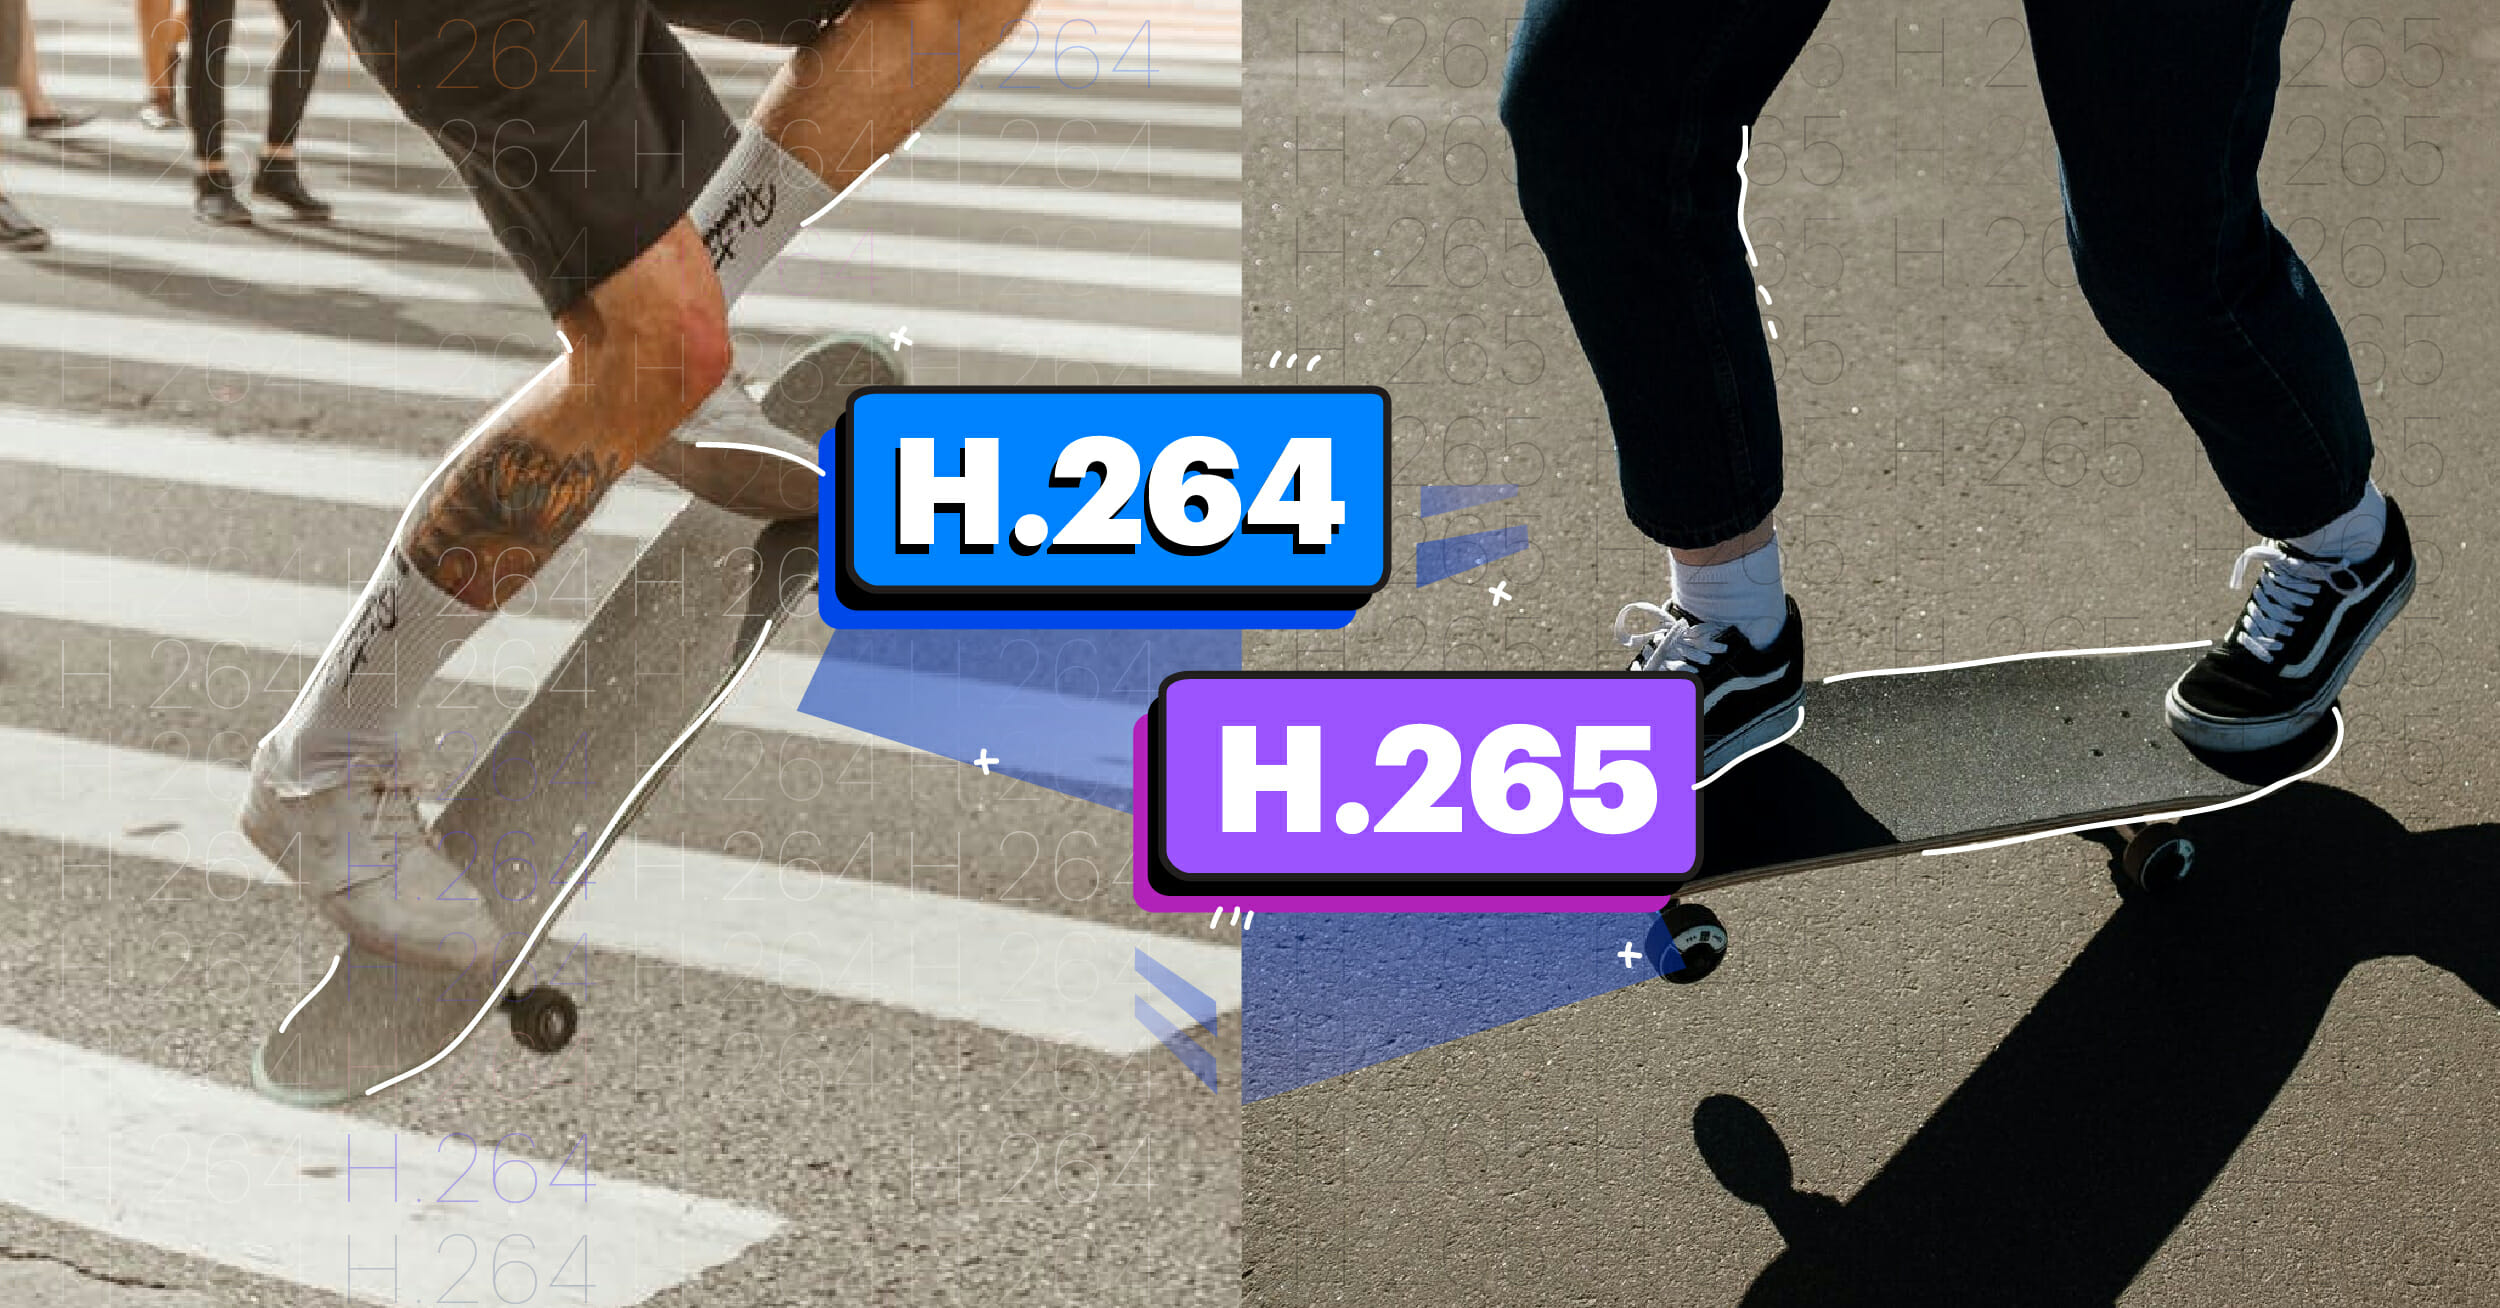 H.264 vs. H.265: Time to Make the Switch?